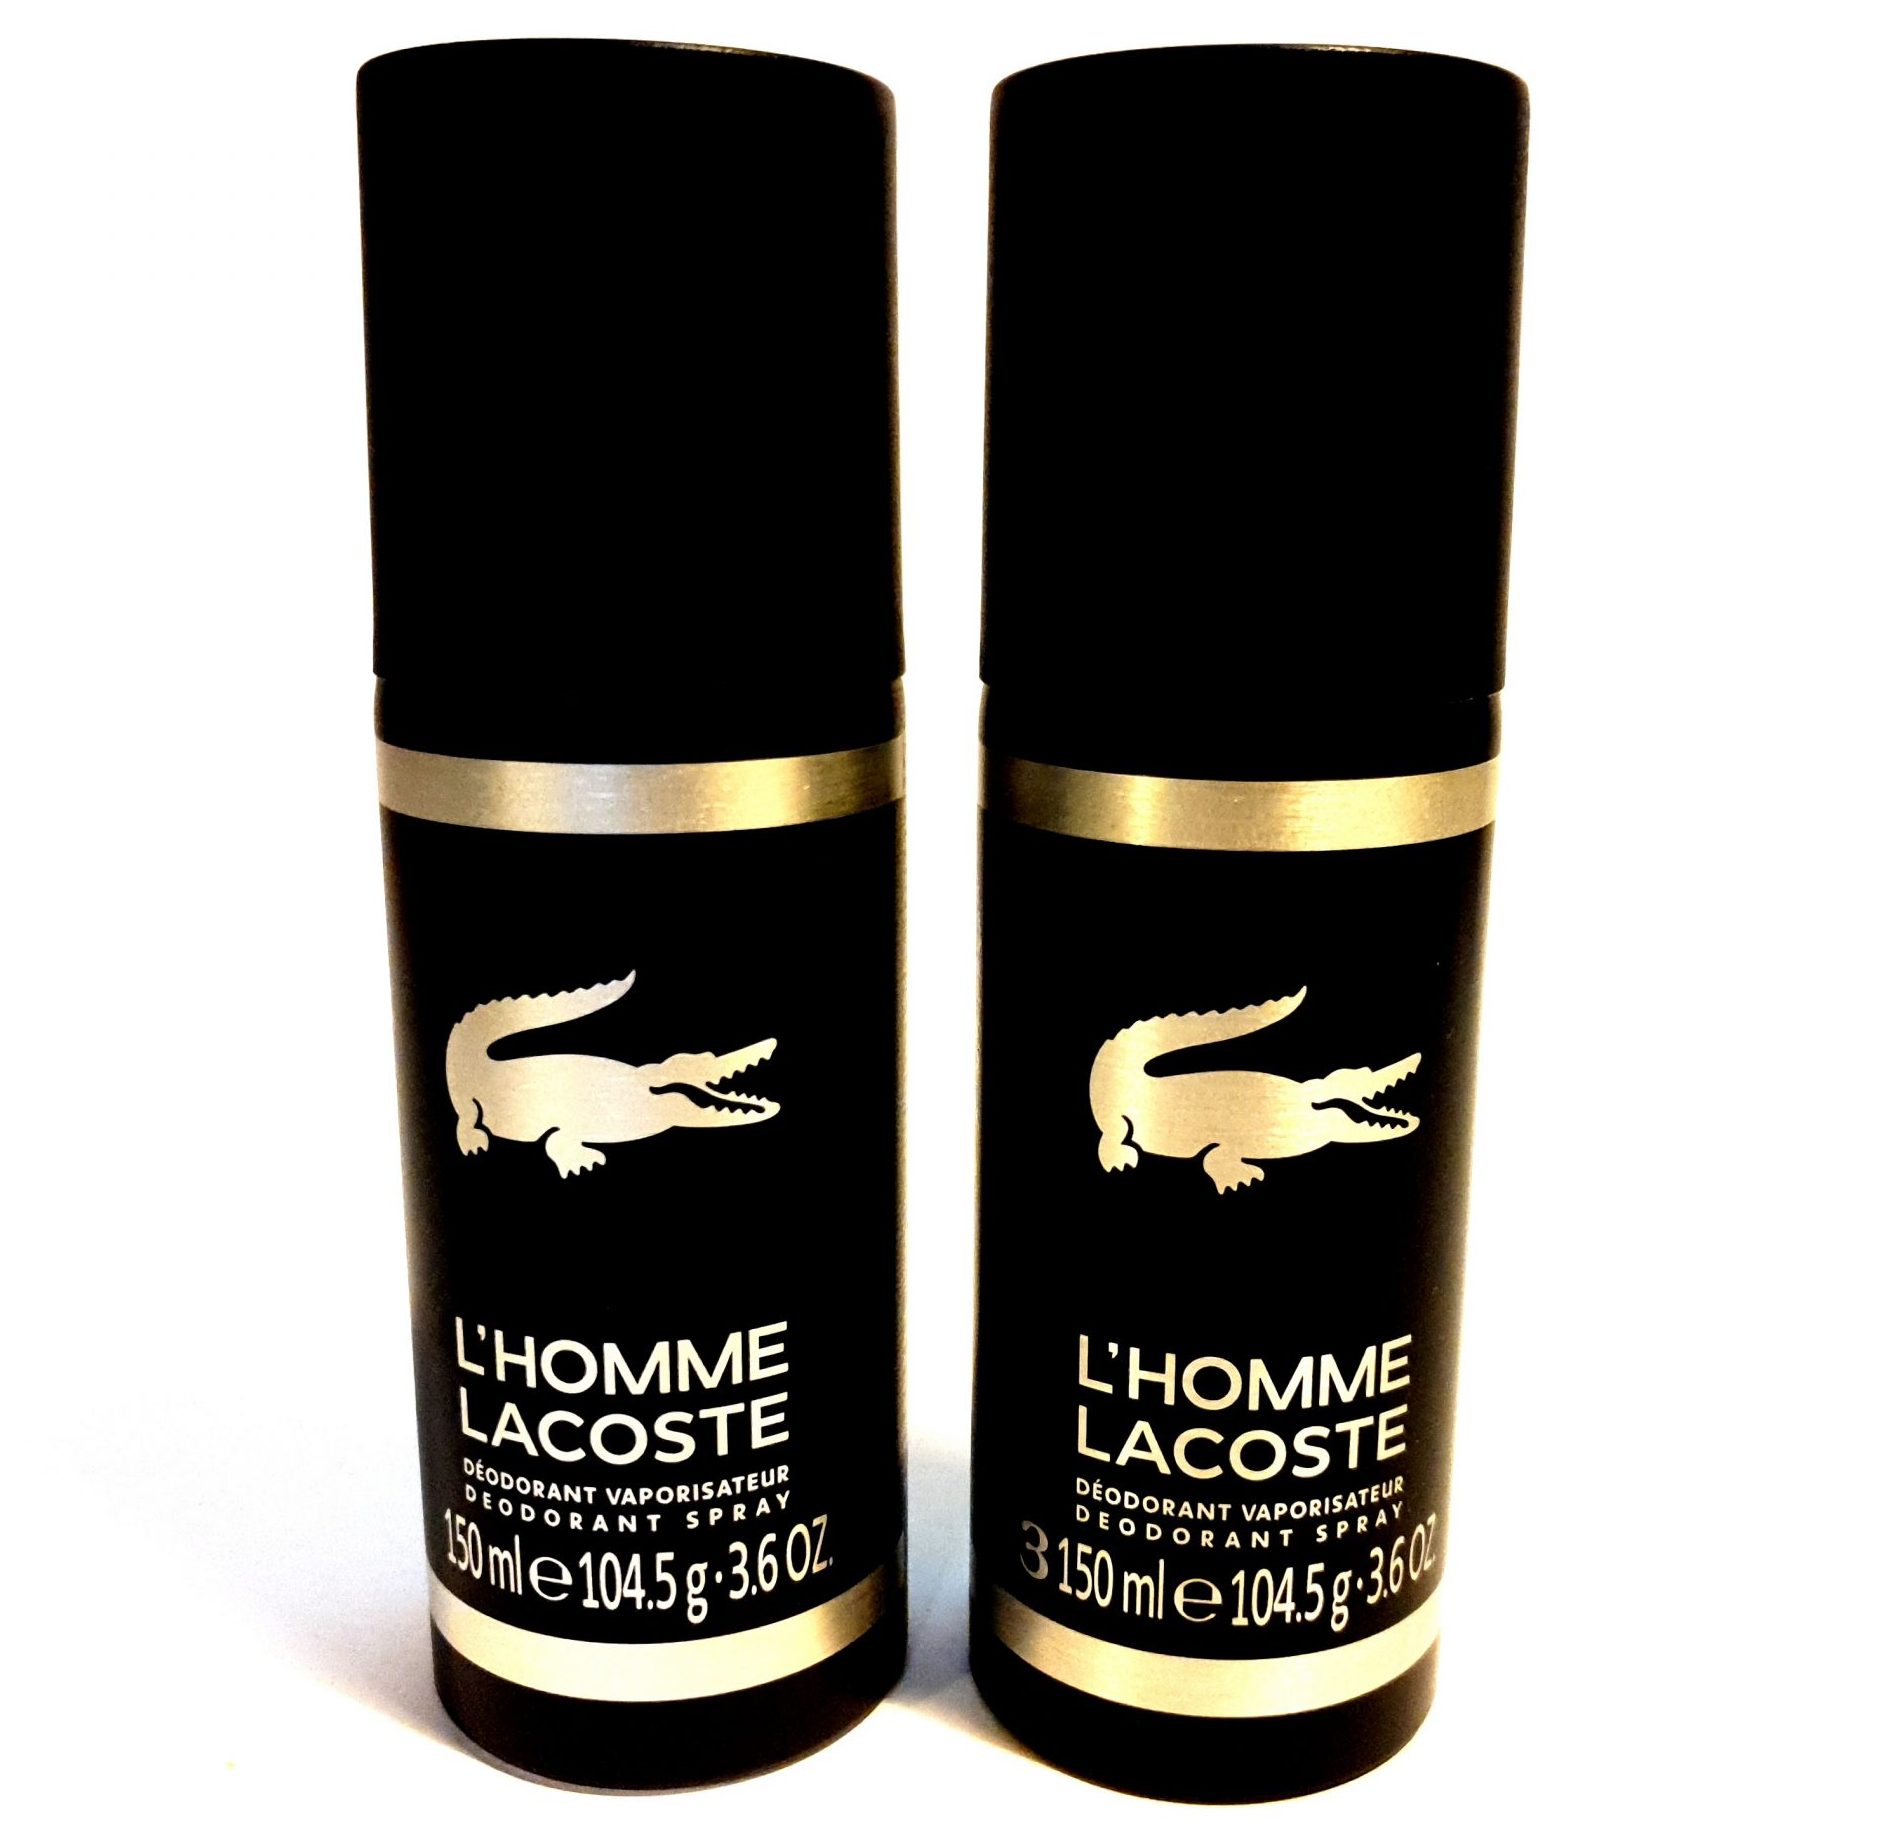 2x Lacoste L'Homme 150ml Anti-perspirant Spray for